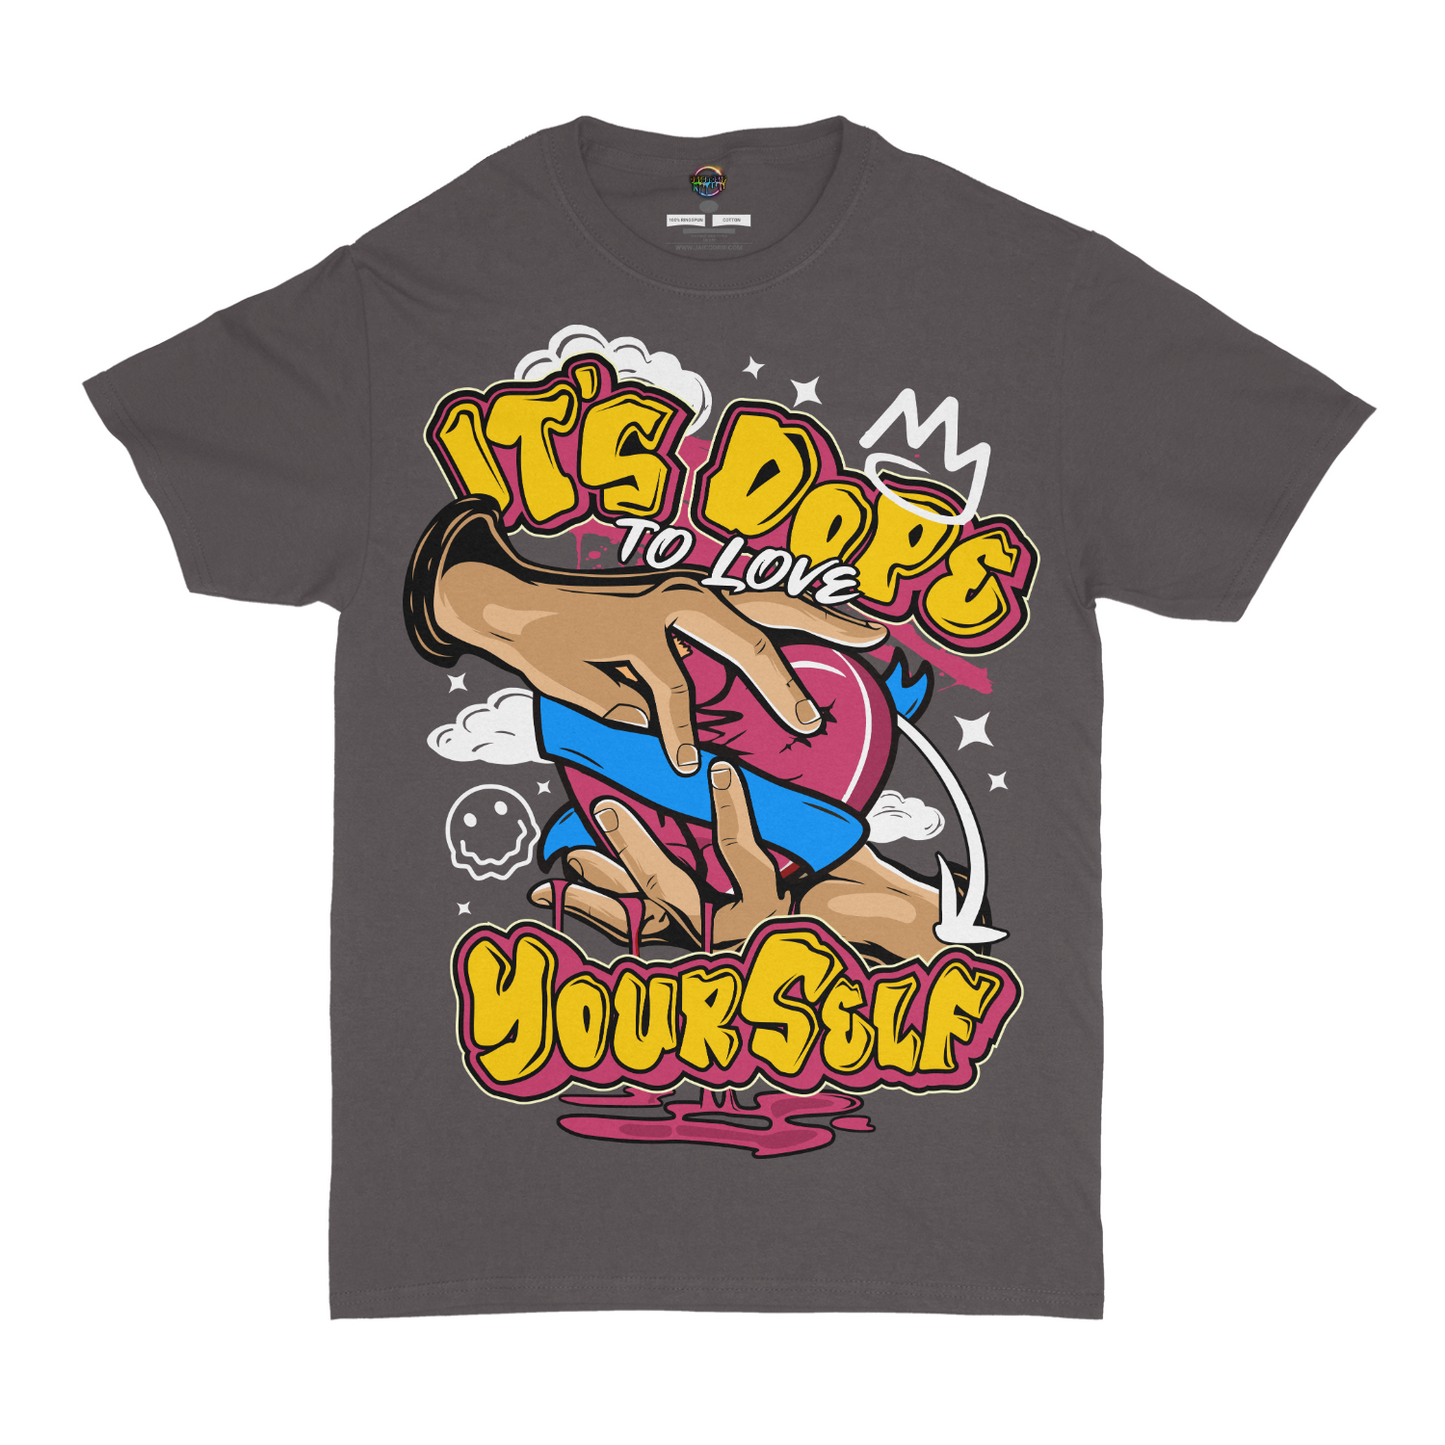 It's Dope To Love Yourself Graphic Unisex T-Shirt